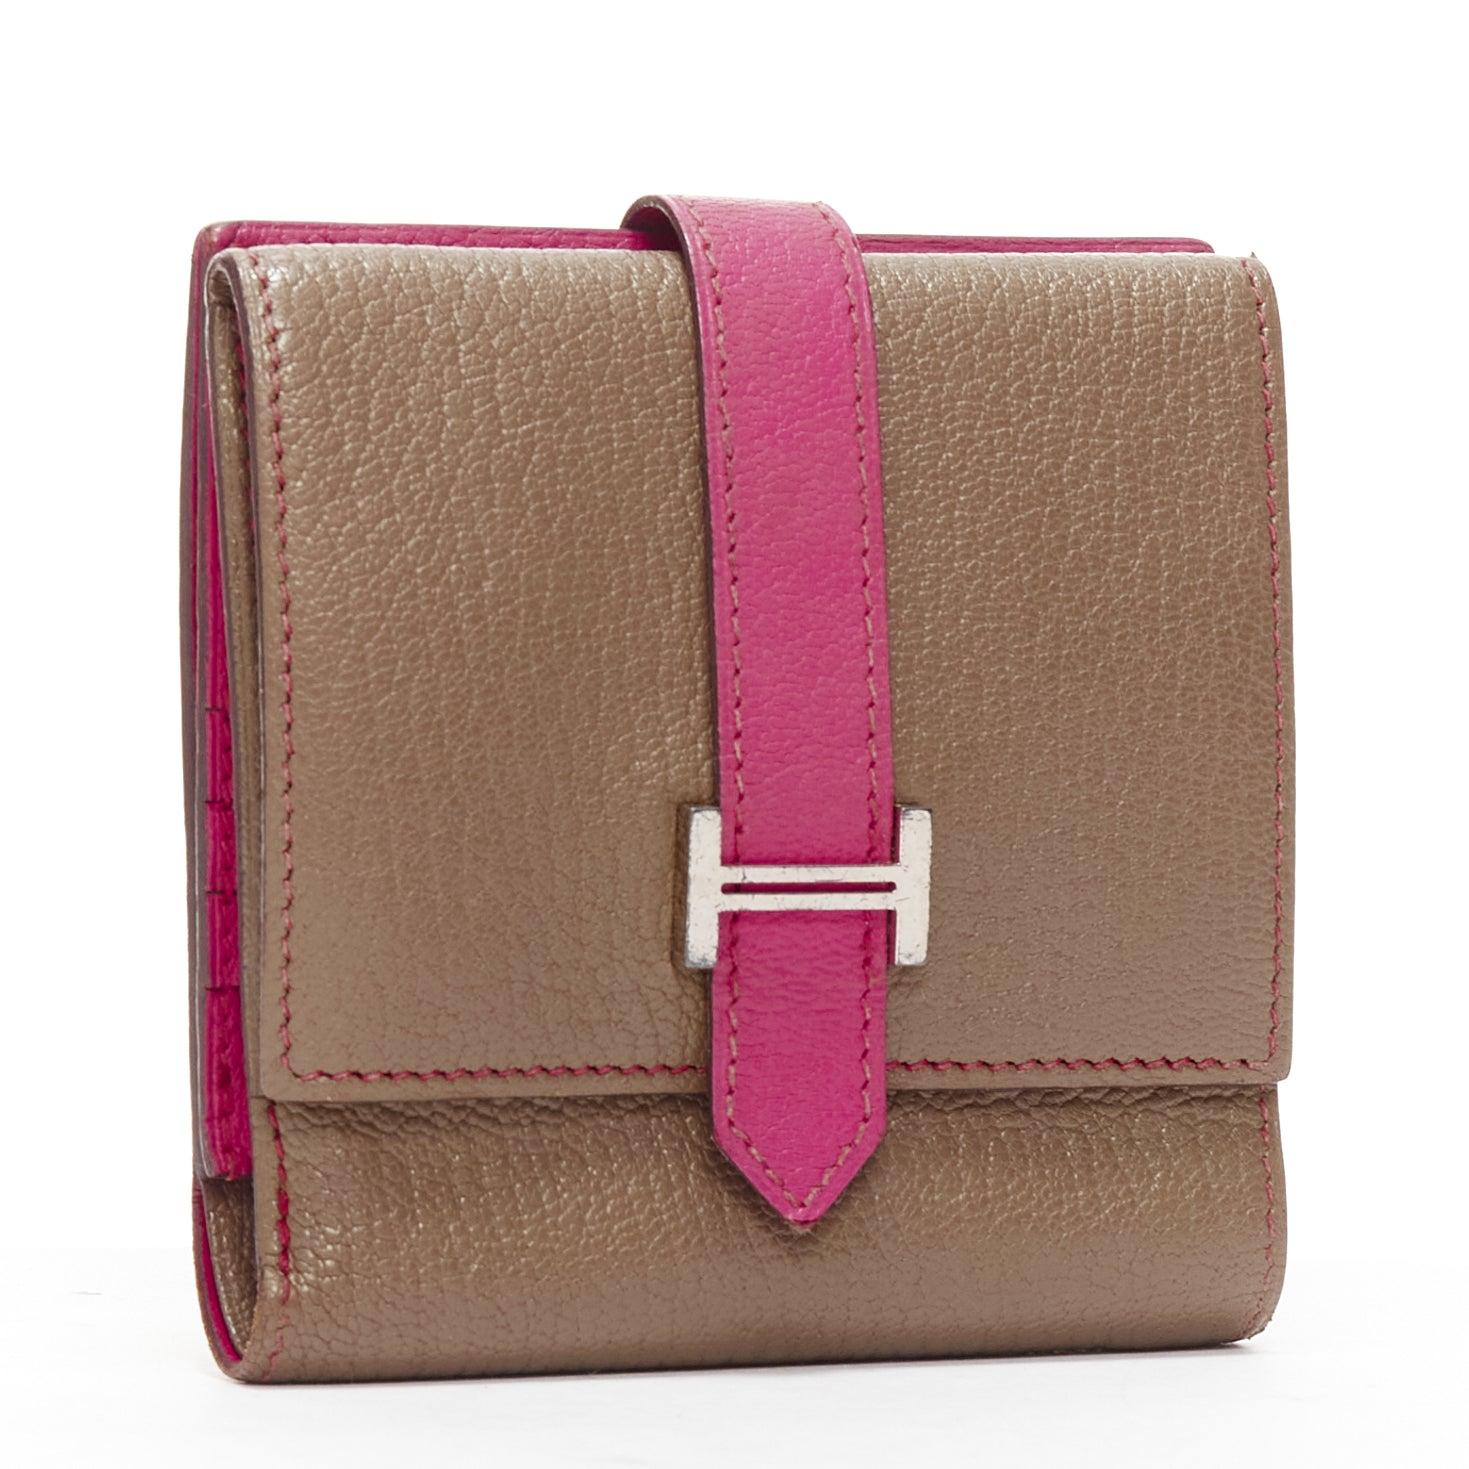 HERMES Bearn taupe pink leather H logo strap bifold square wallet
Reference: AAWC/A00989
Brand: Hermes
Model: Bearn
Material: Leather
Color: Pink, Brown
Pattern: Solid
Closure: Loop Through
Lining: Pink Leather
Extra Details: Loop through front and